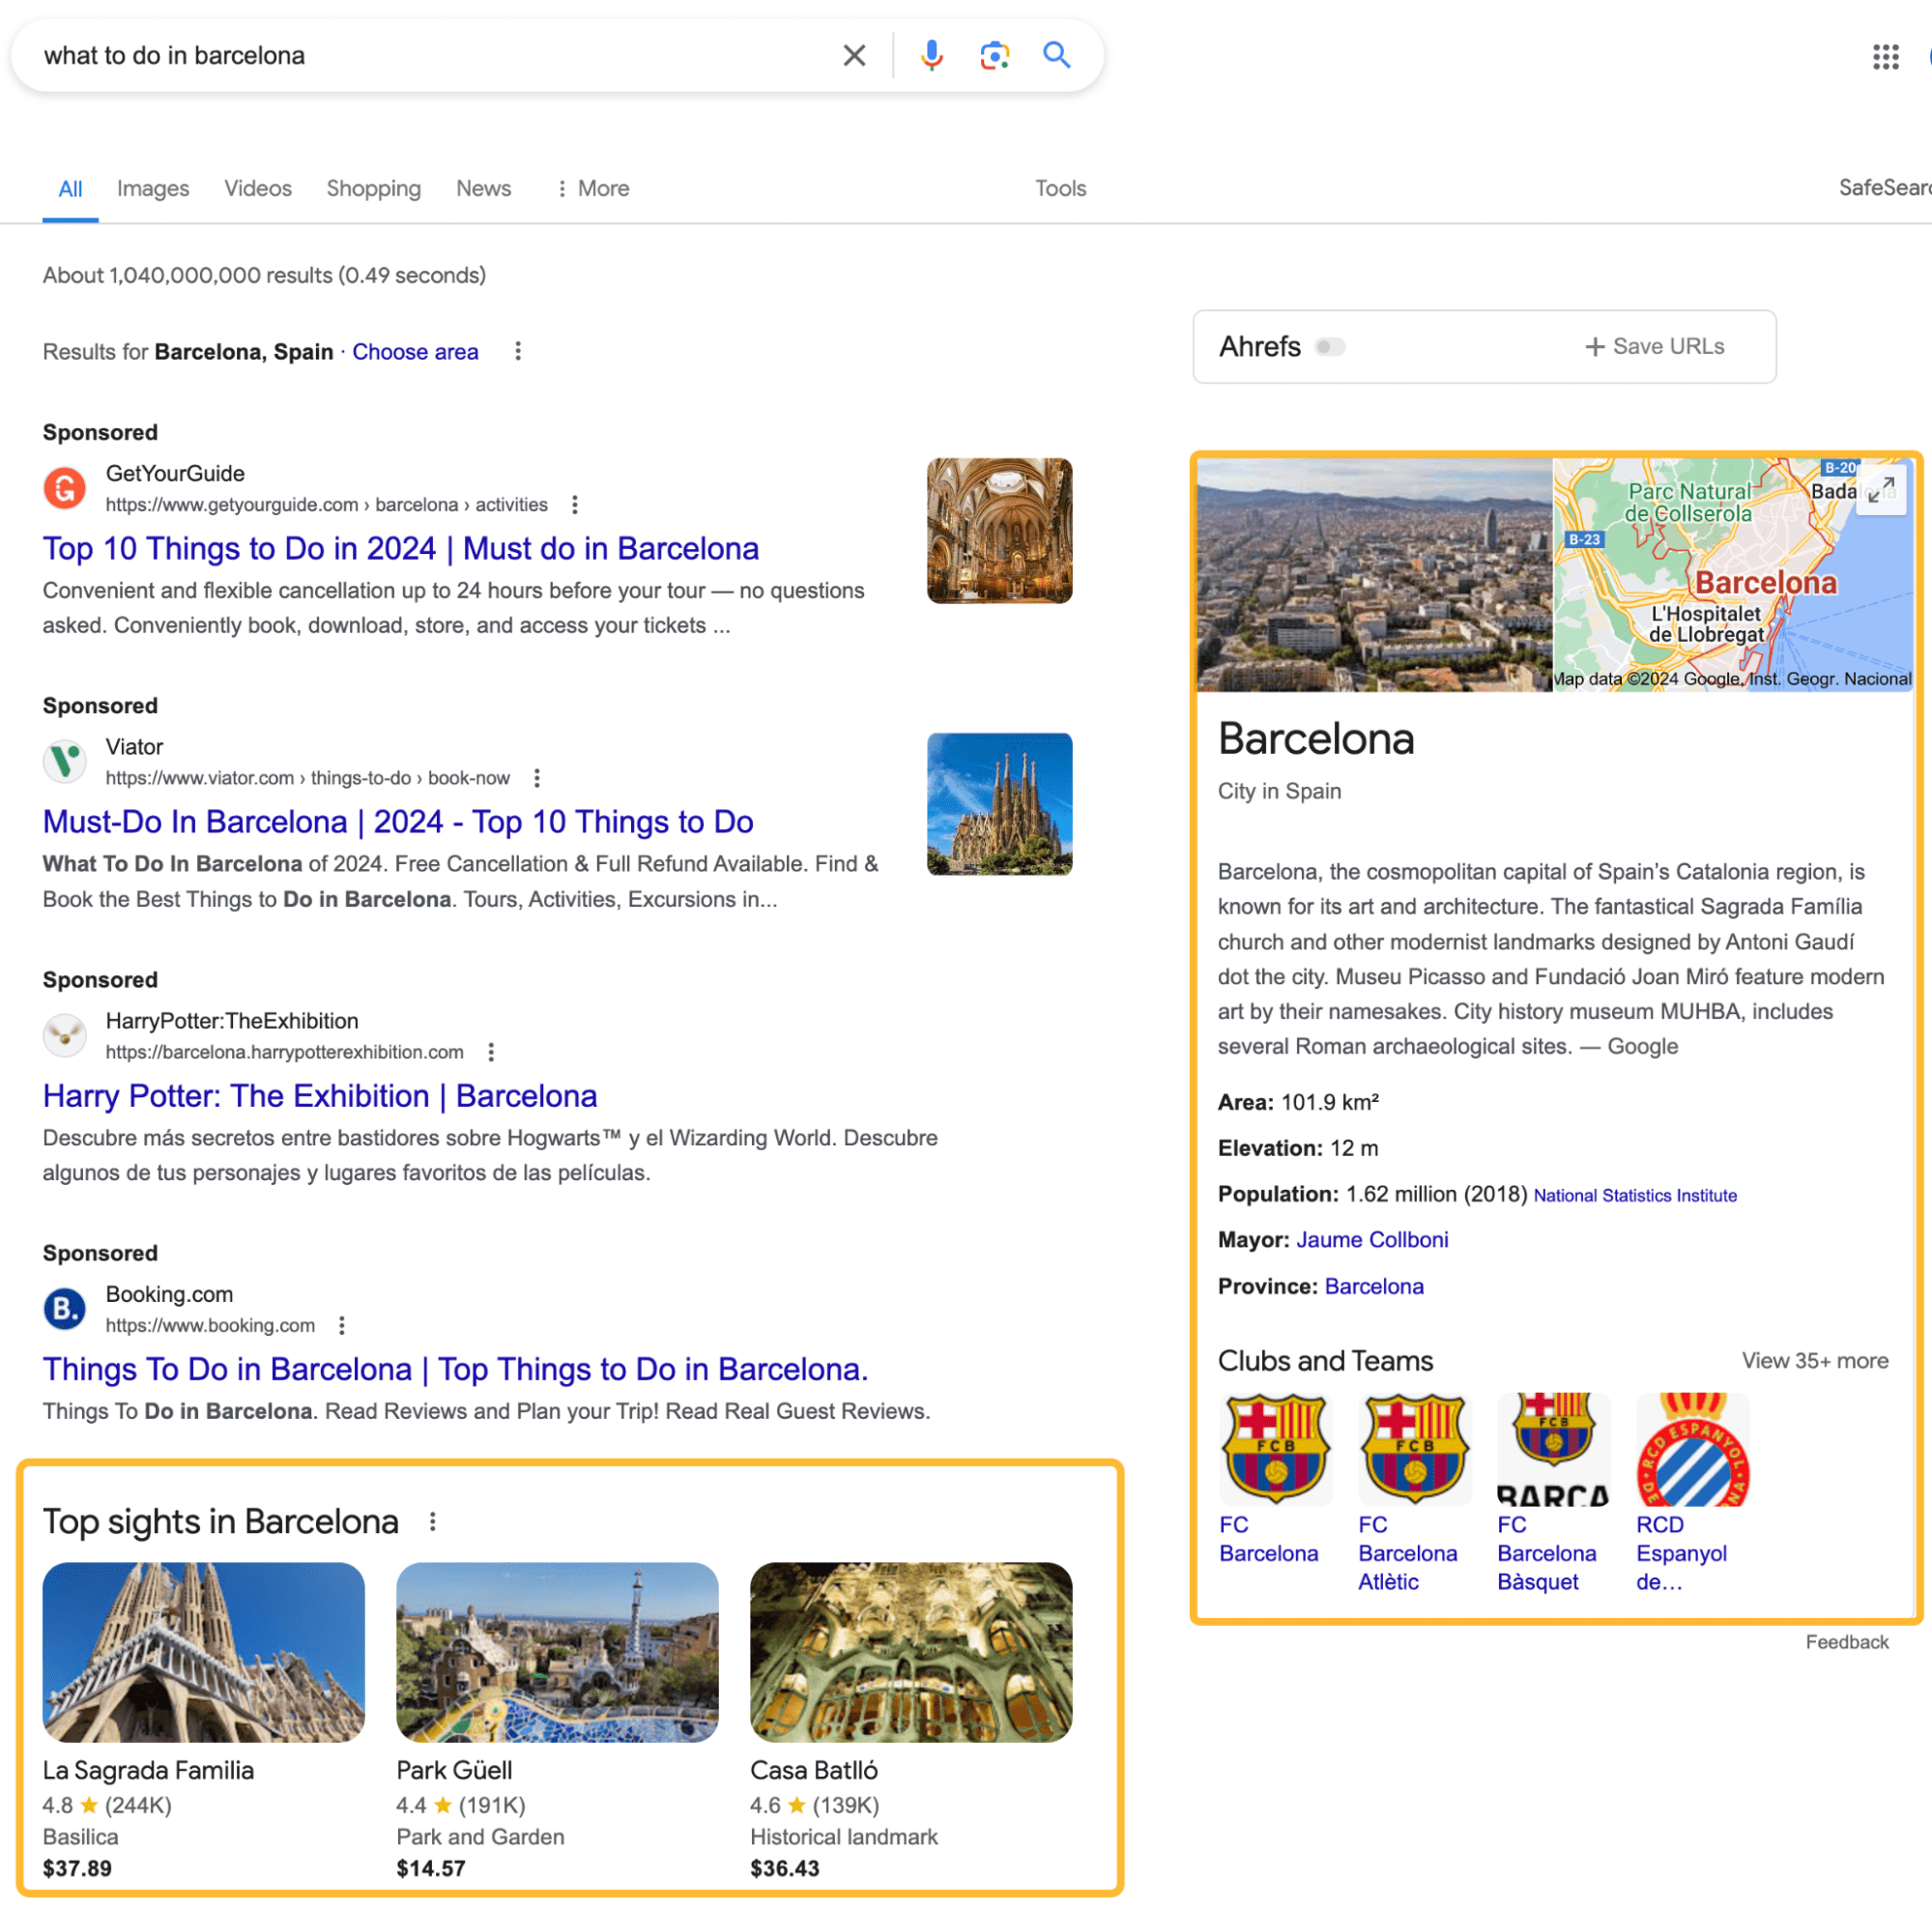 Google's SERPs show a carousel and a knowledge panel